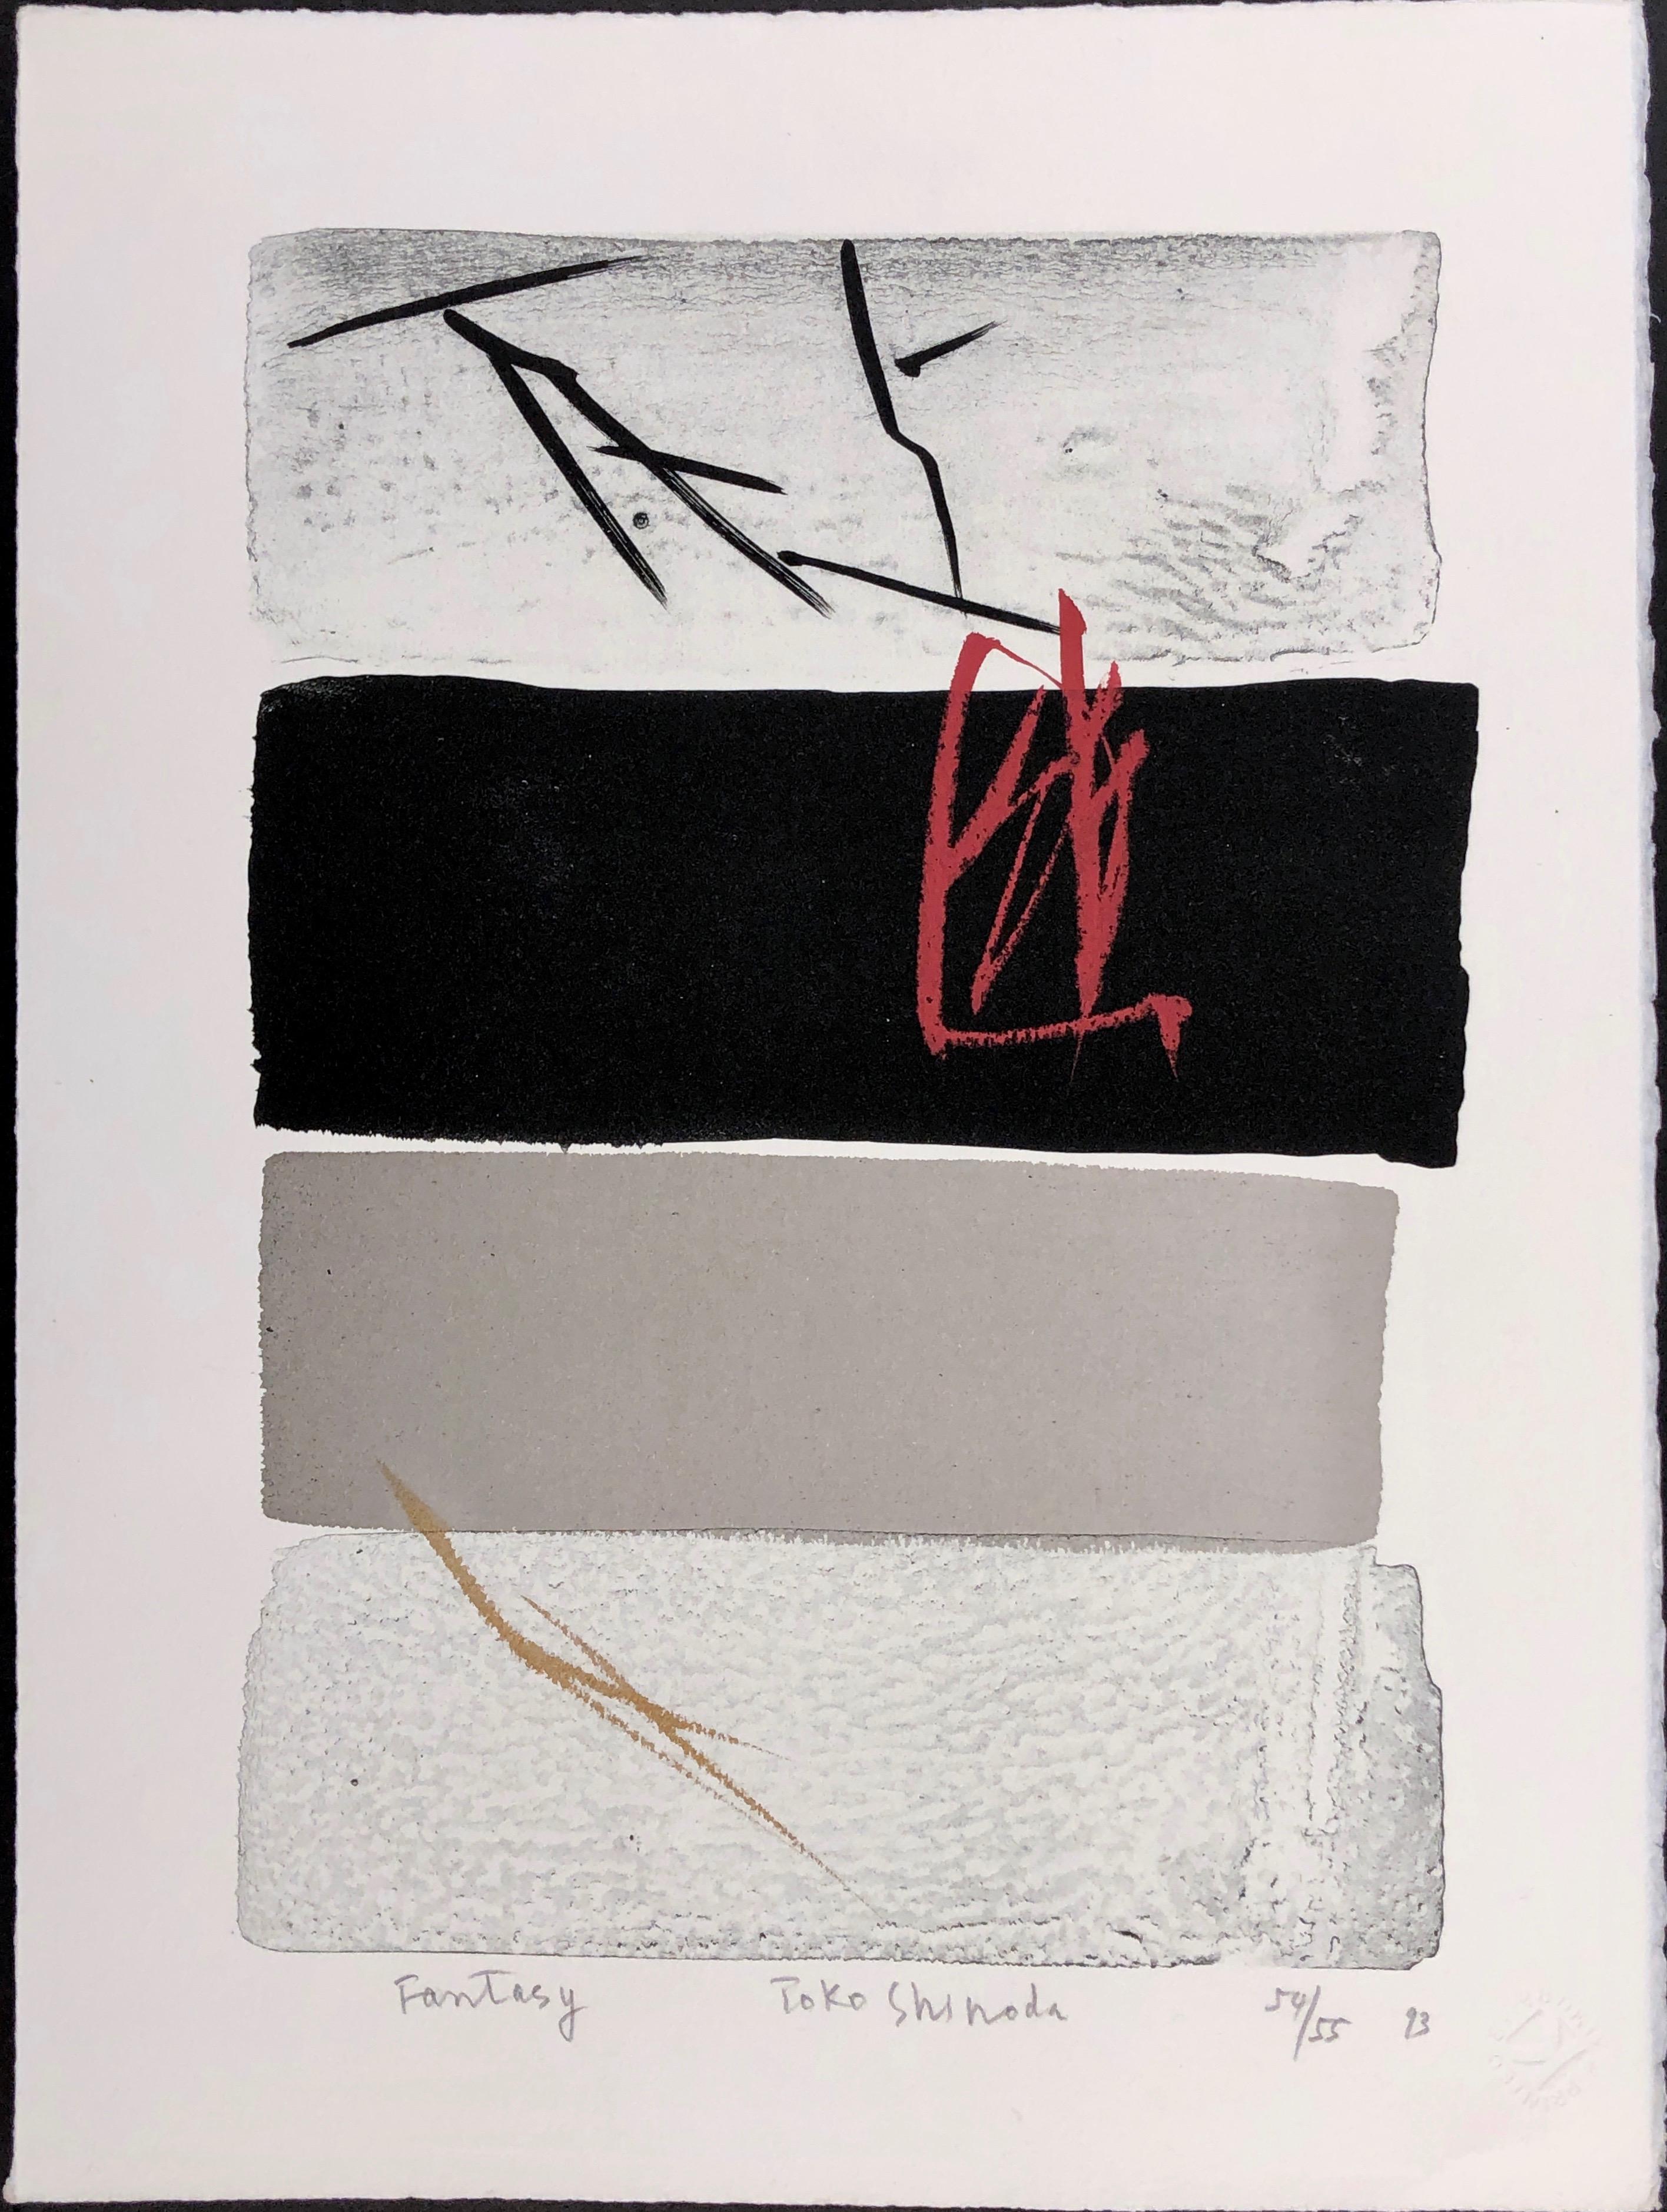 Toko Shinoda Abstract Print - Fantasy, Japanese, limited edition lithograph, black, white, red, signed, titled